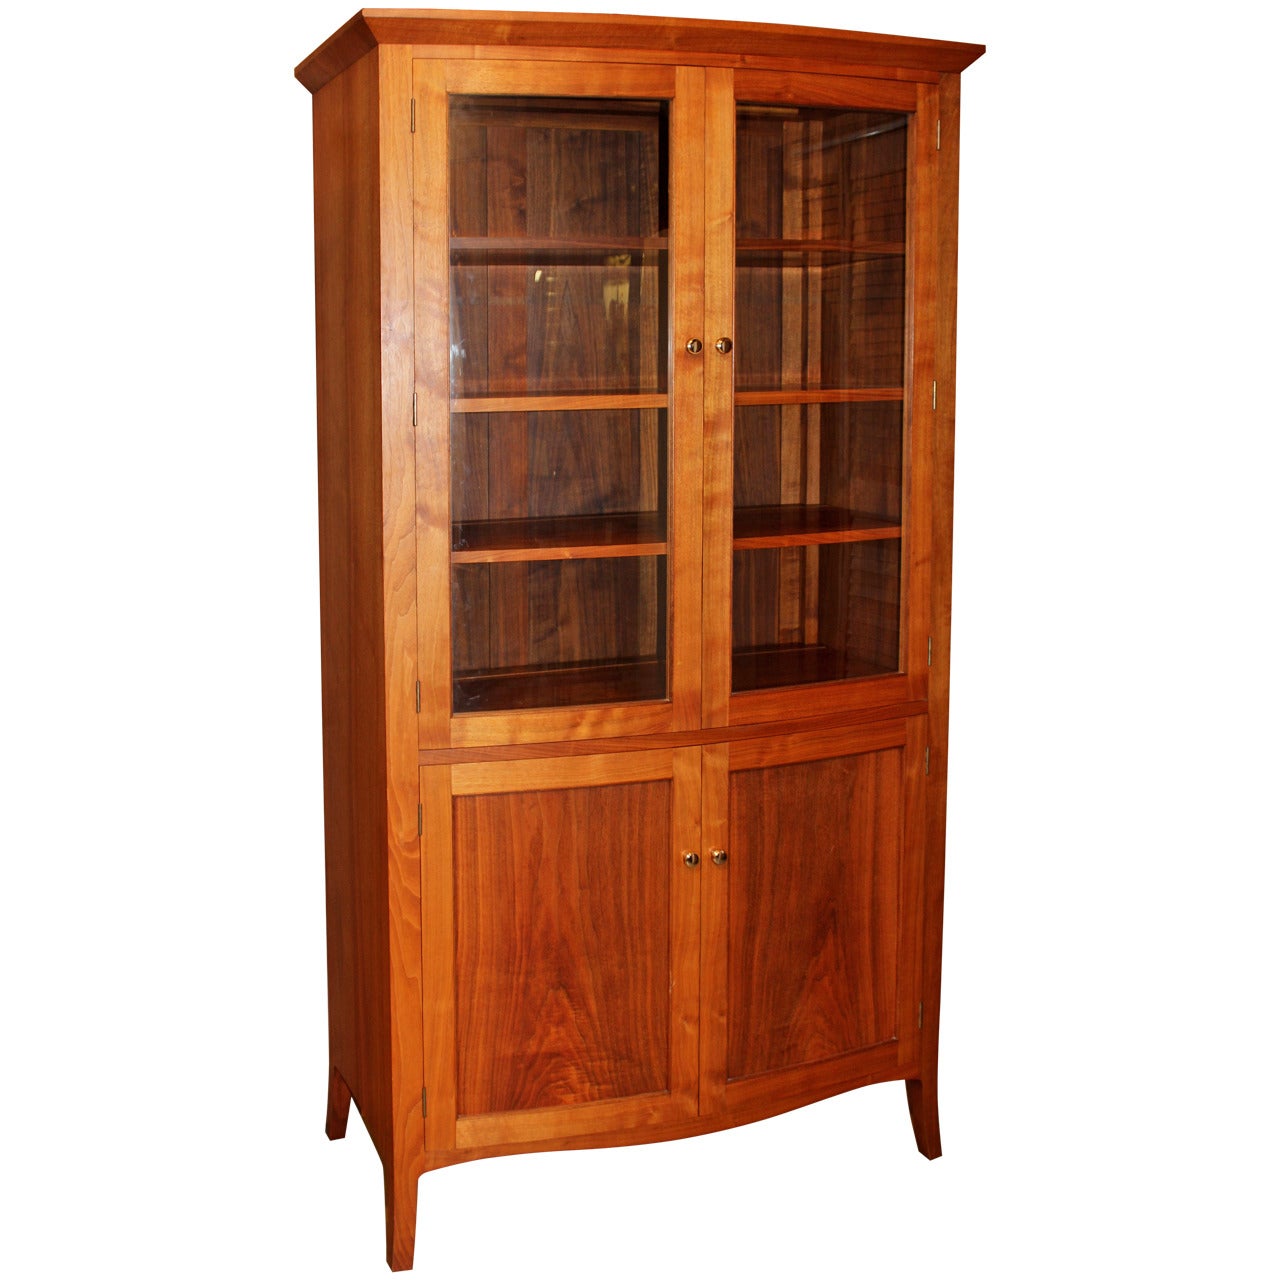 Exceptional Cherry Cupboard by David Margonelli in the Shaker manner